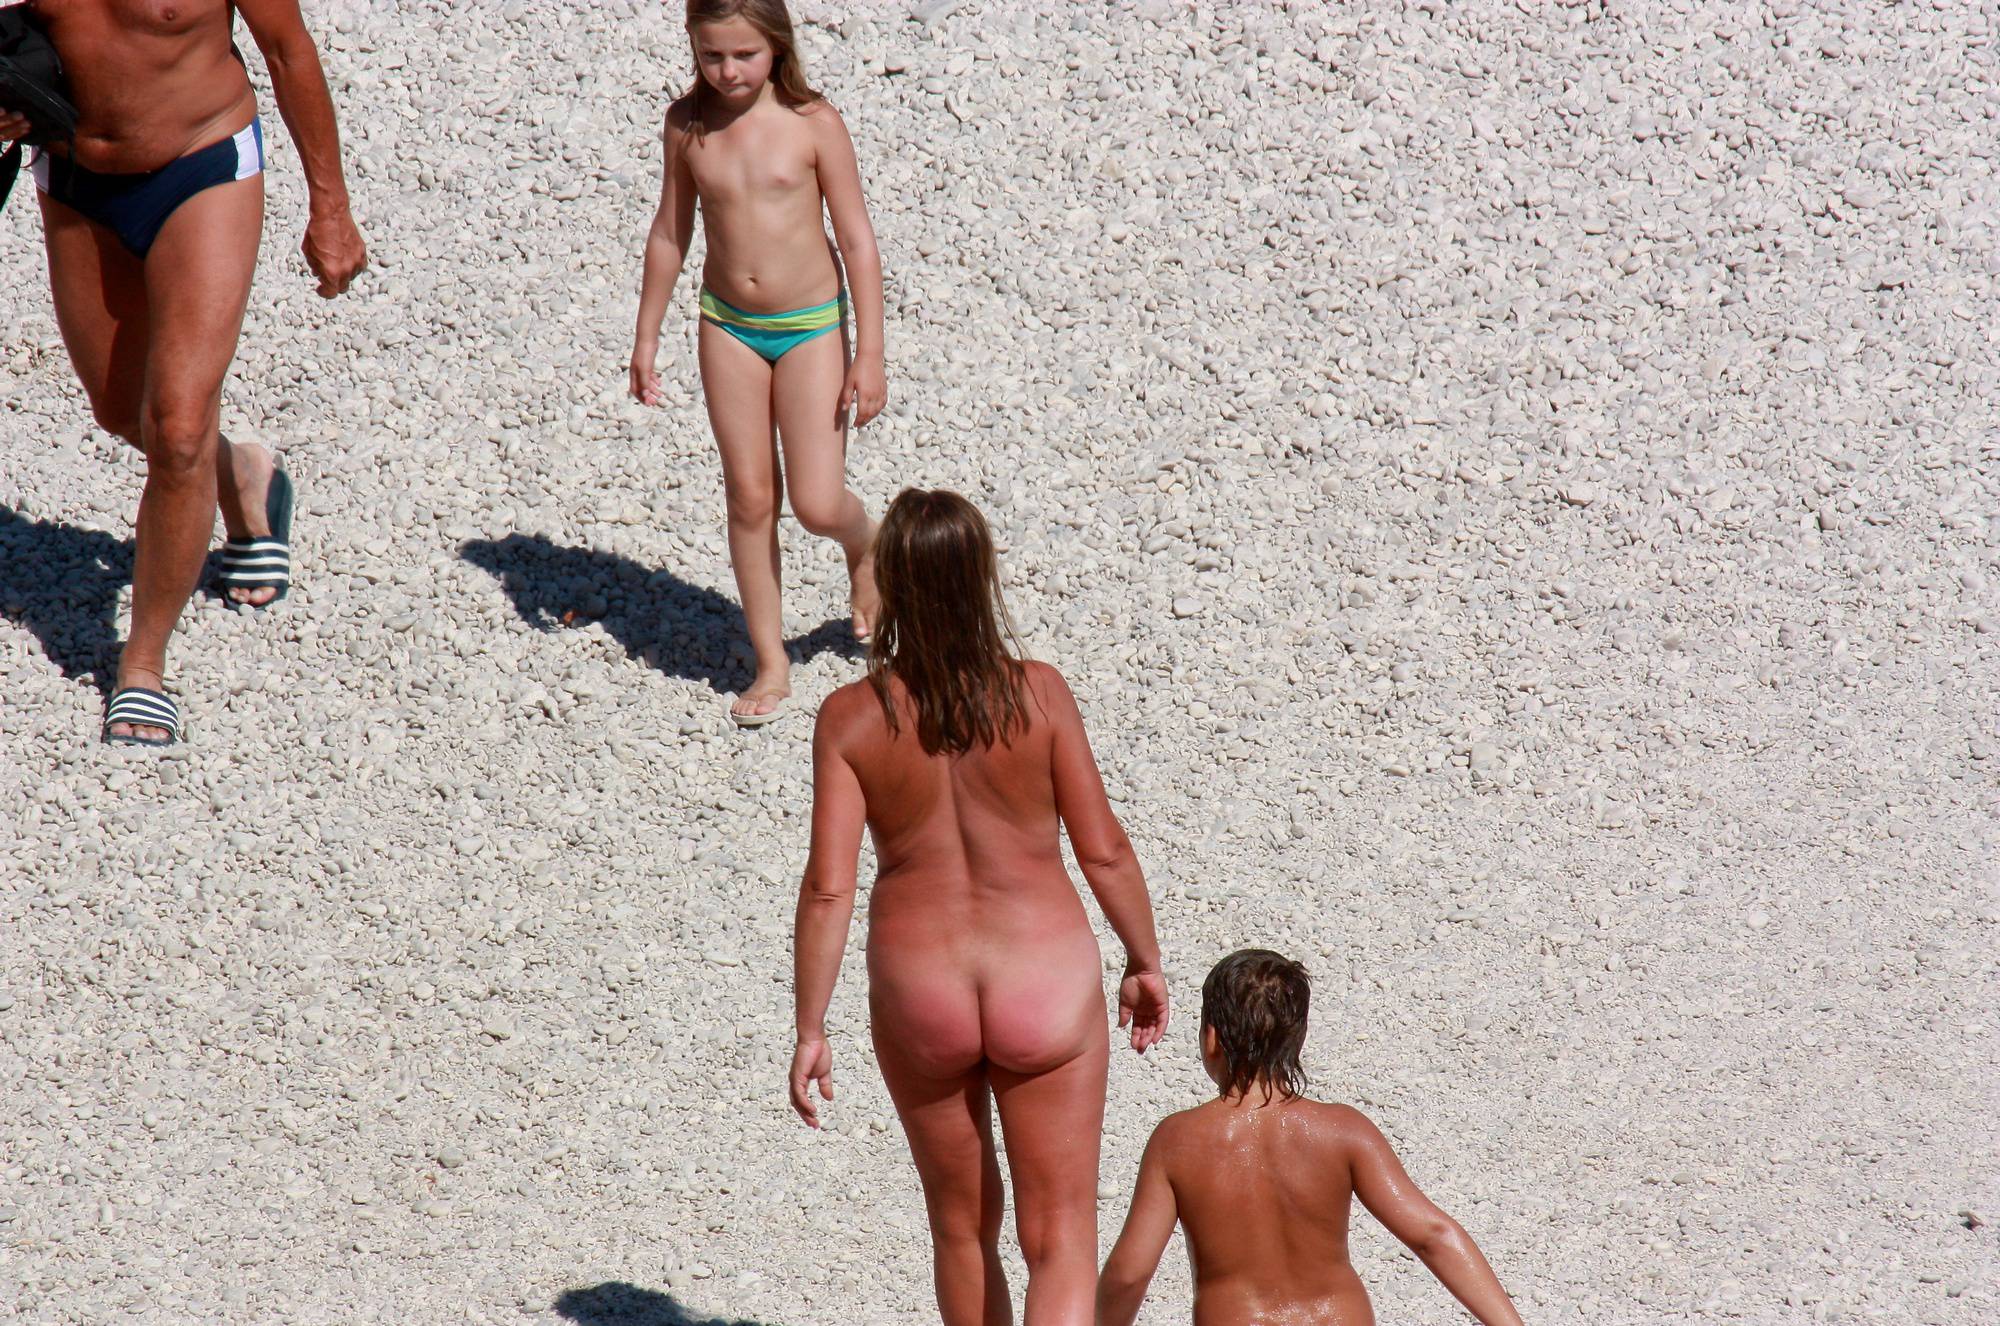 Nudist Pictures Not All Families Go Nude - 2